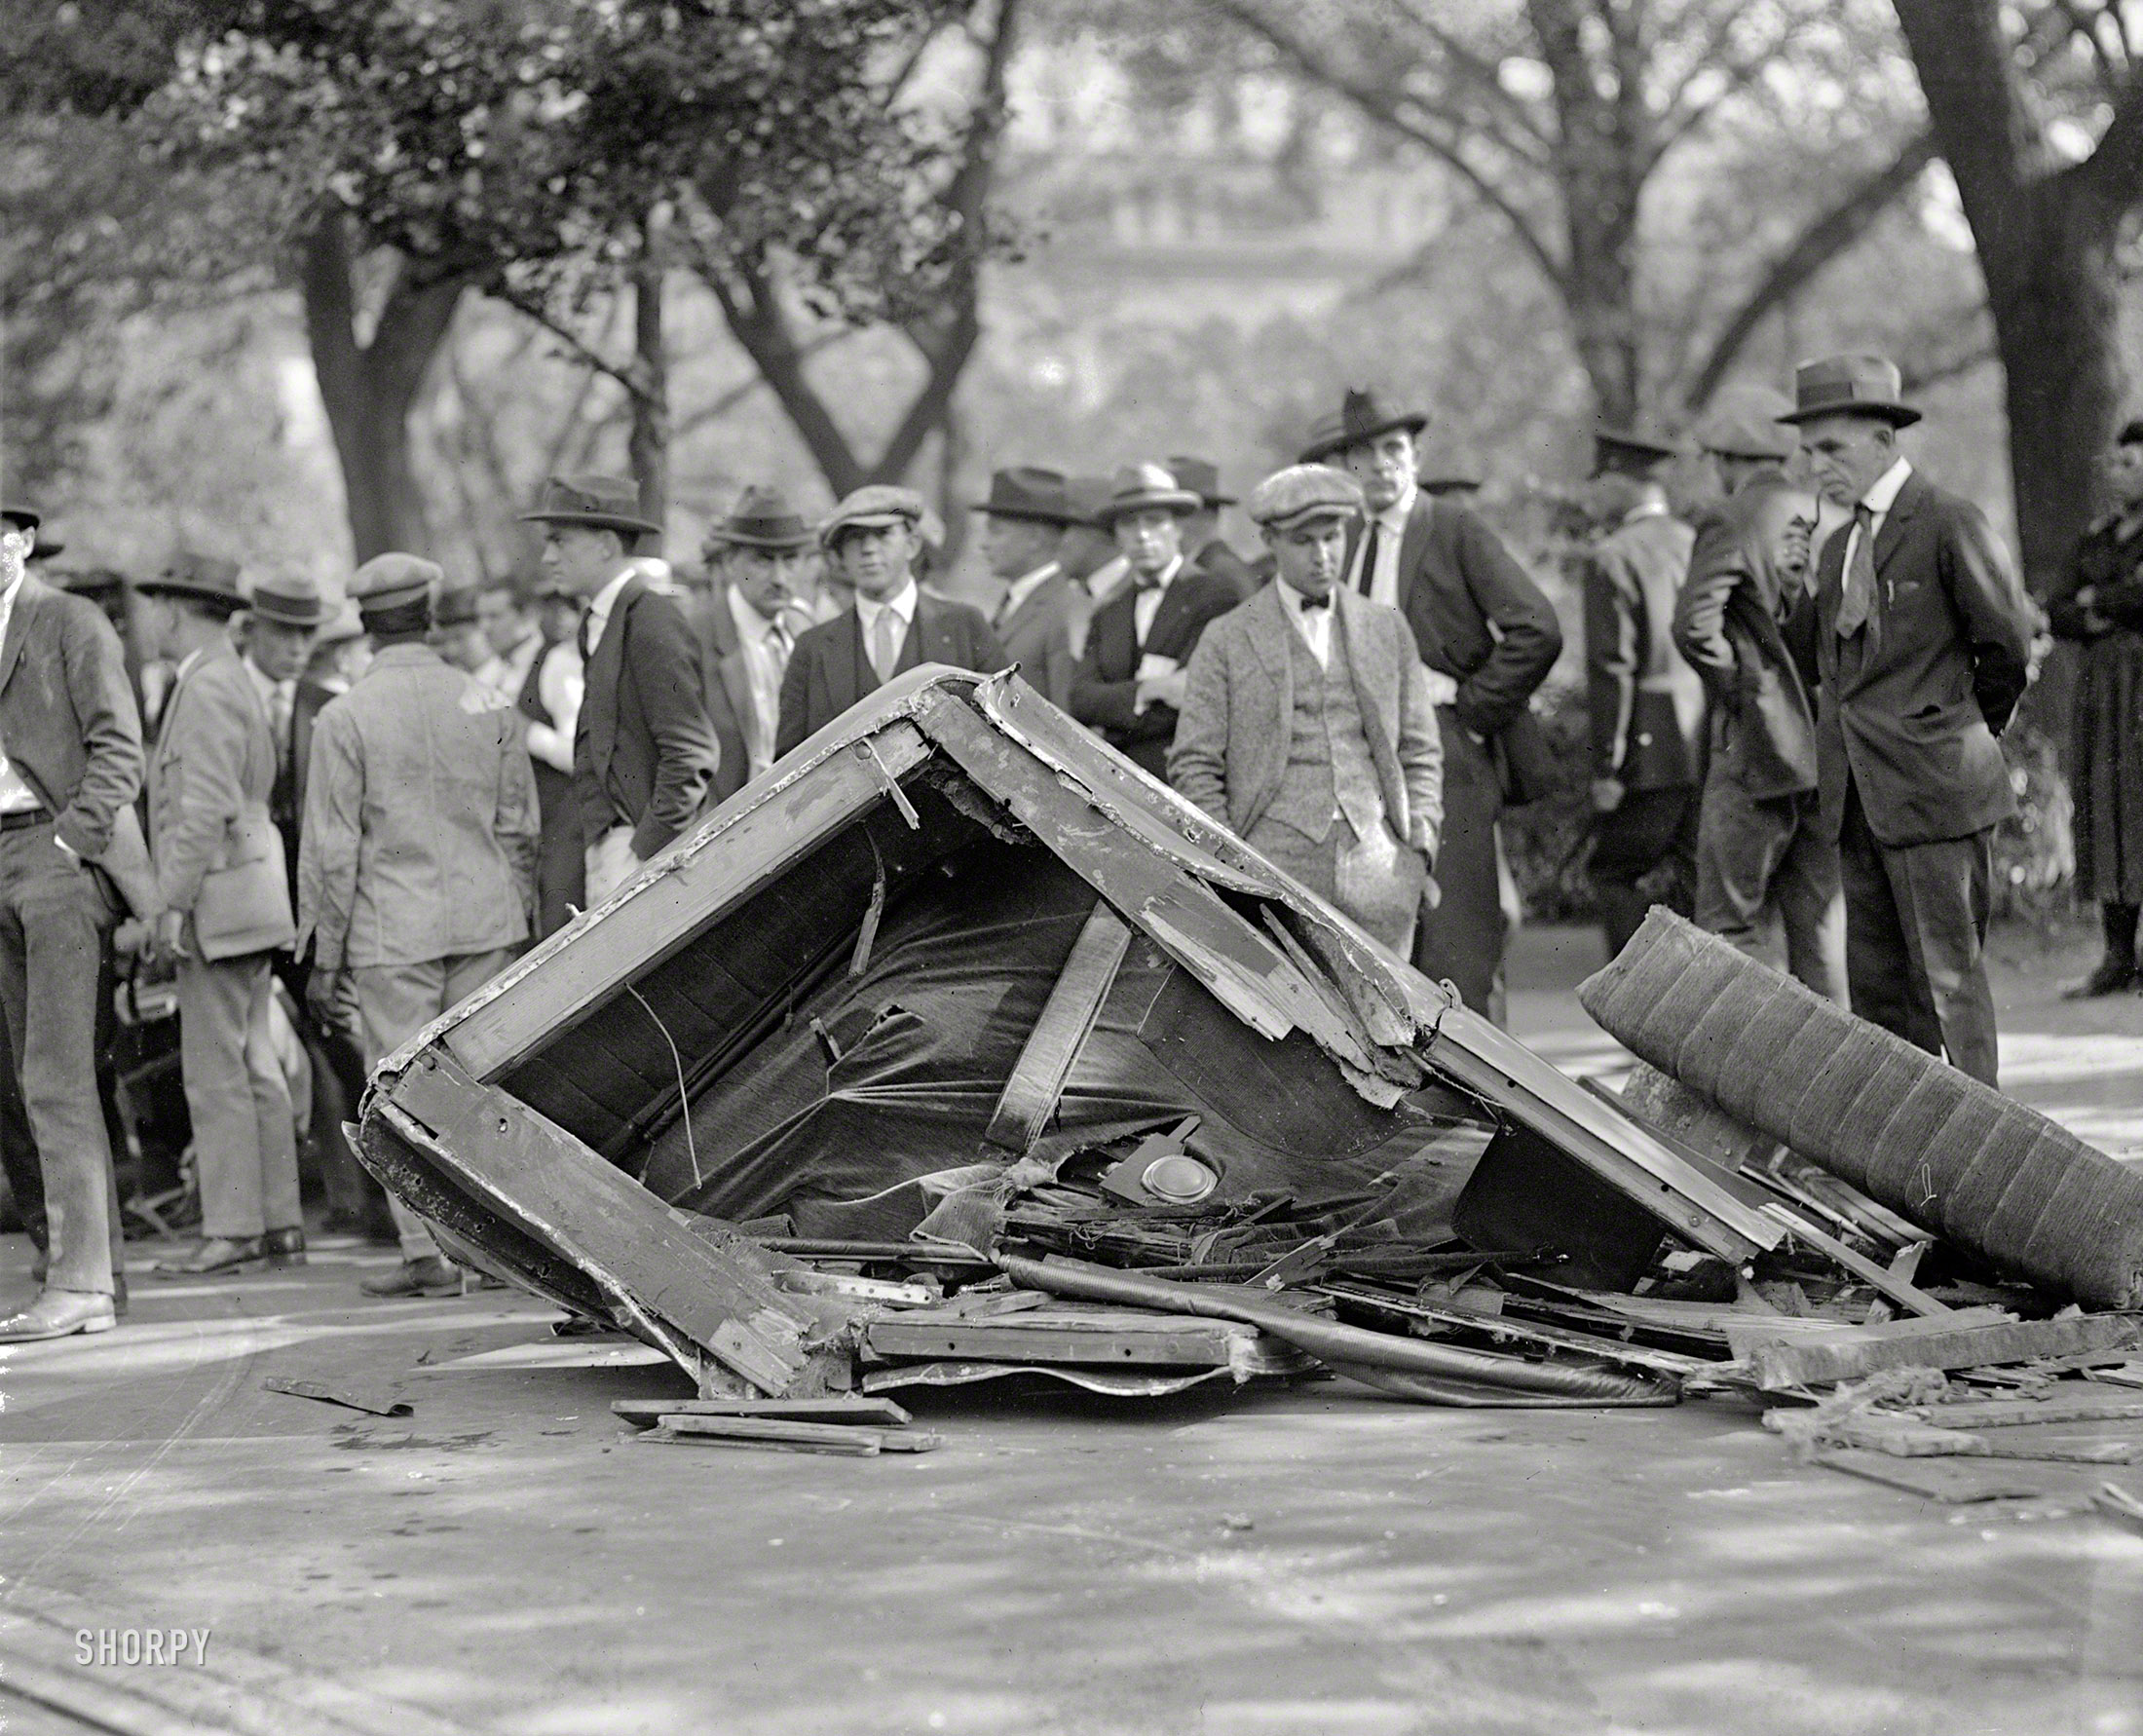 Washington, D.C., 1923. "Asst. P.M.G. Bartlett's car." Assistant Postmaster General John Bartlett survived; his car, also seen here, did not. View full size.